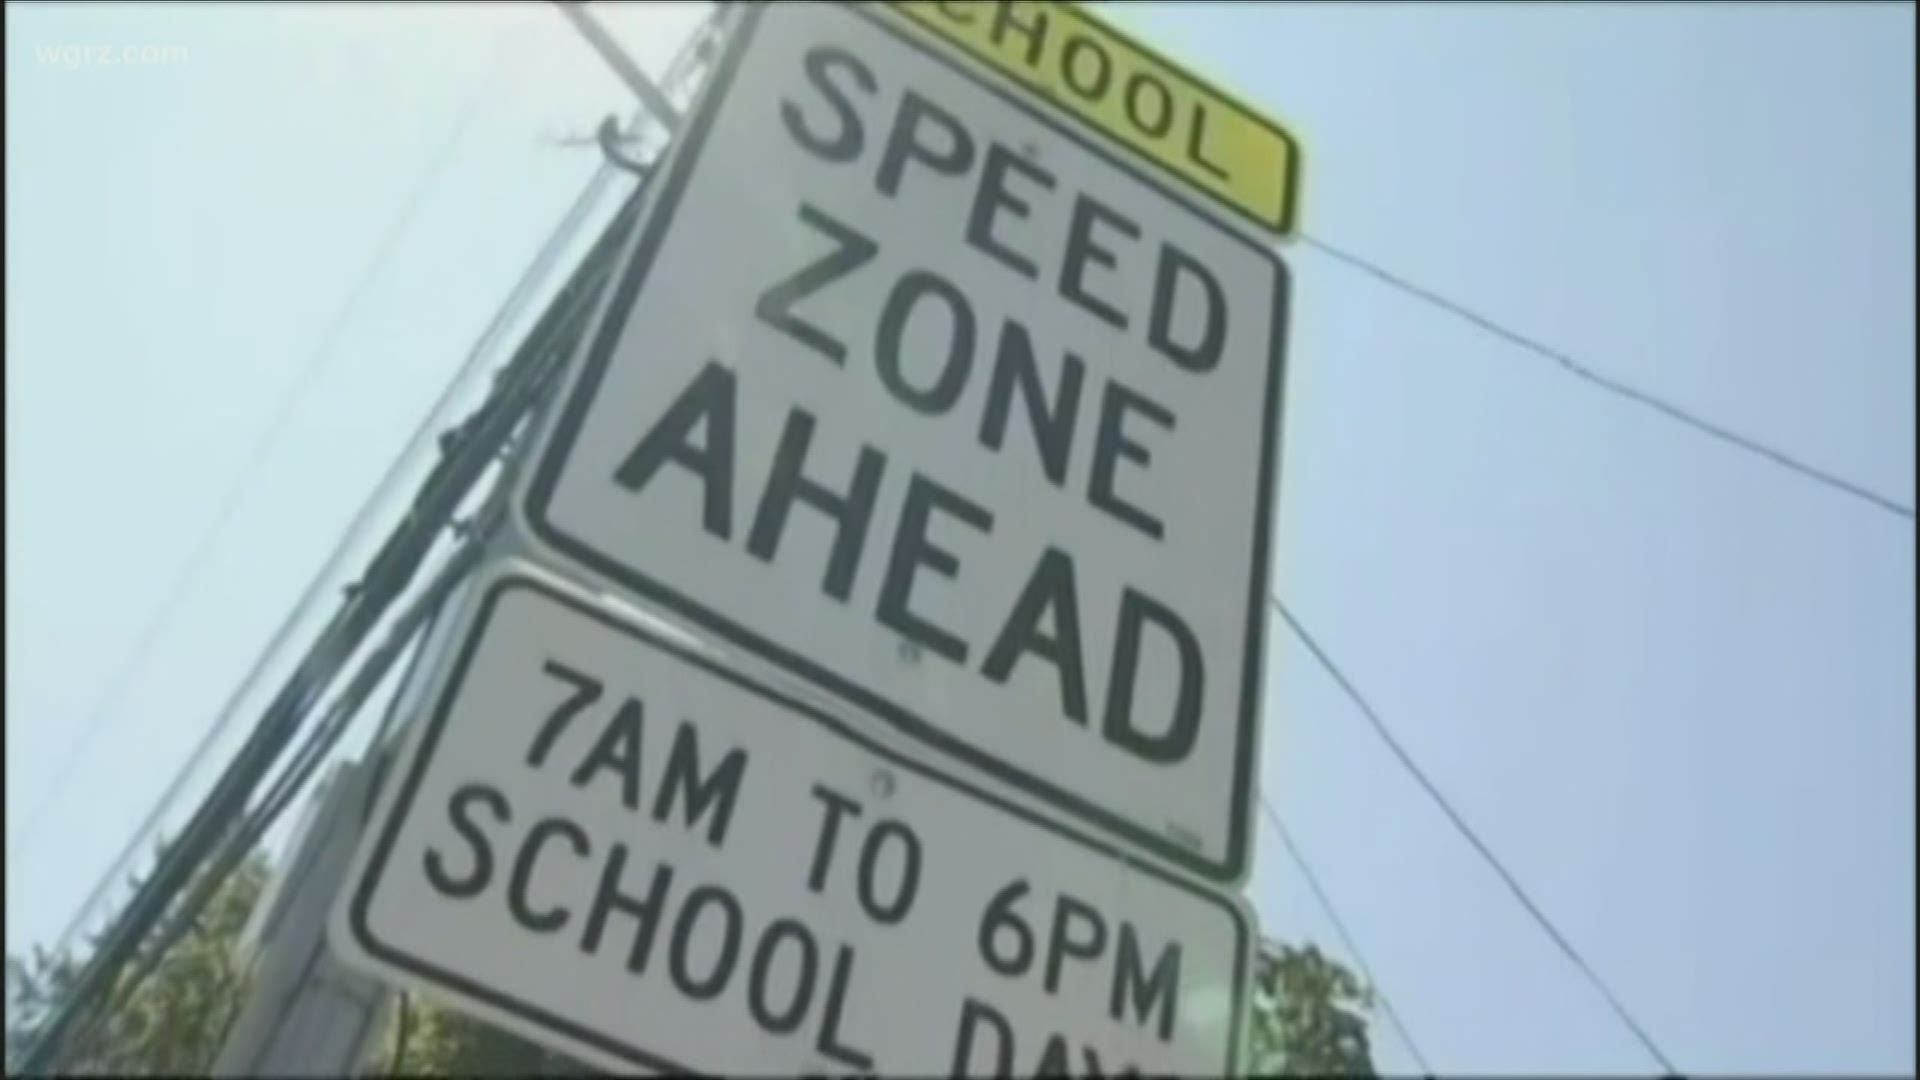 The new devices will help keep kids safe in school zones